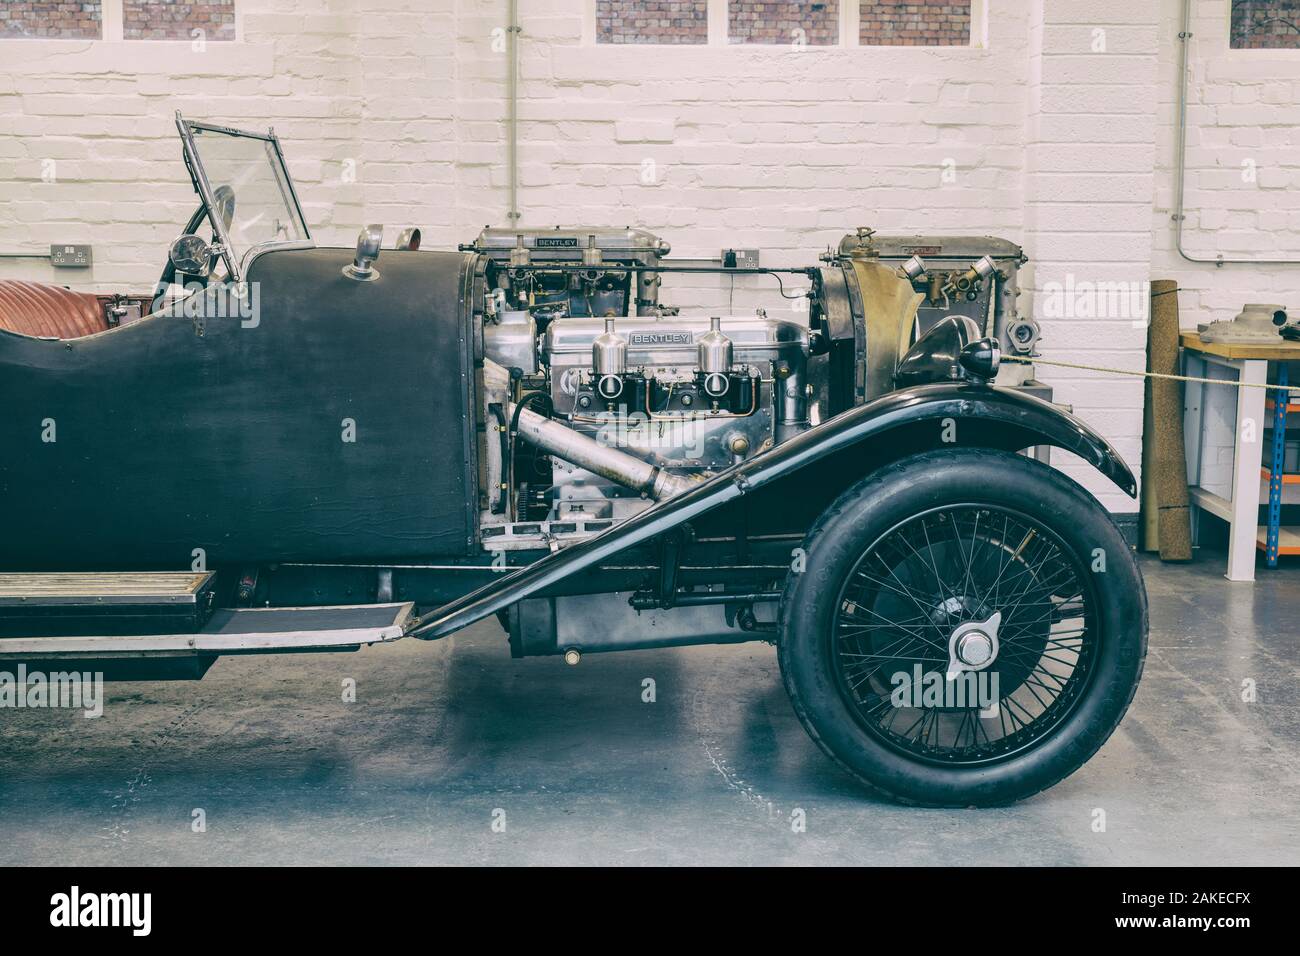 1924 Bentley 3 Liter Speed Model in a workshop at Bicester Heritage Centre Sunday scramble event. Oxfordshire, England. Vintage filter applied Stock Photo